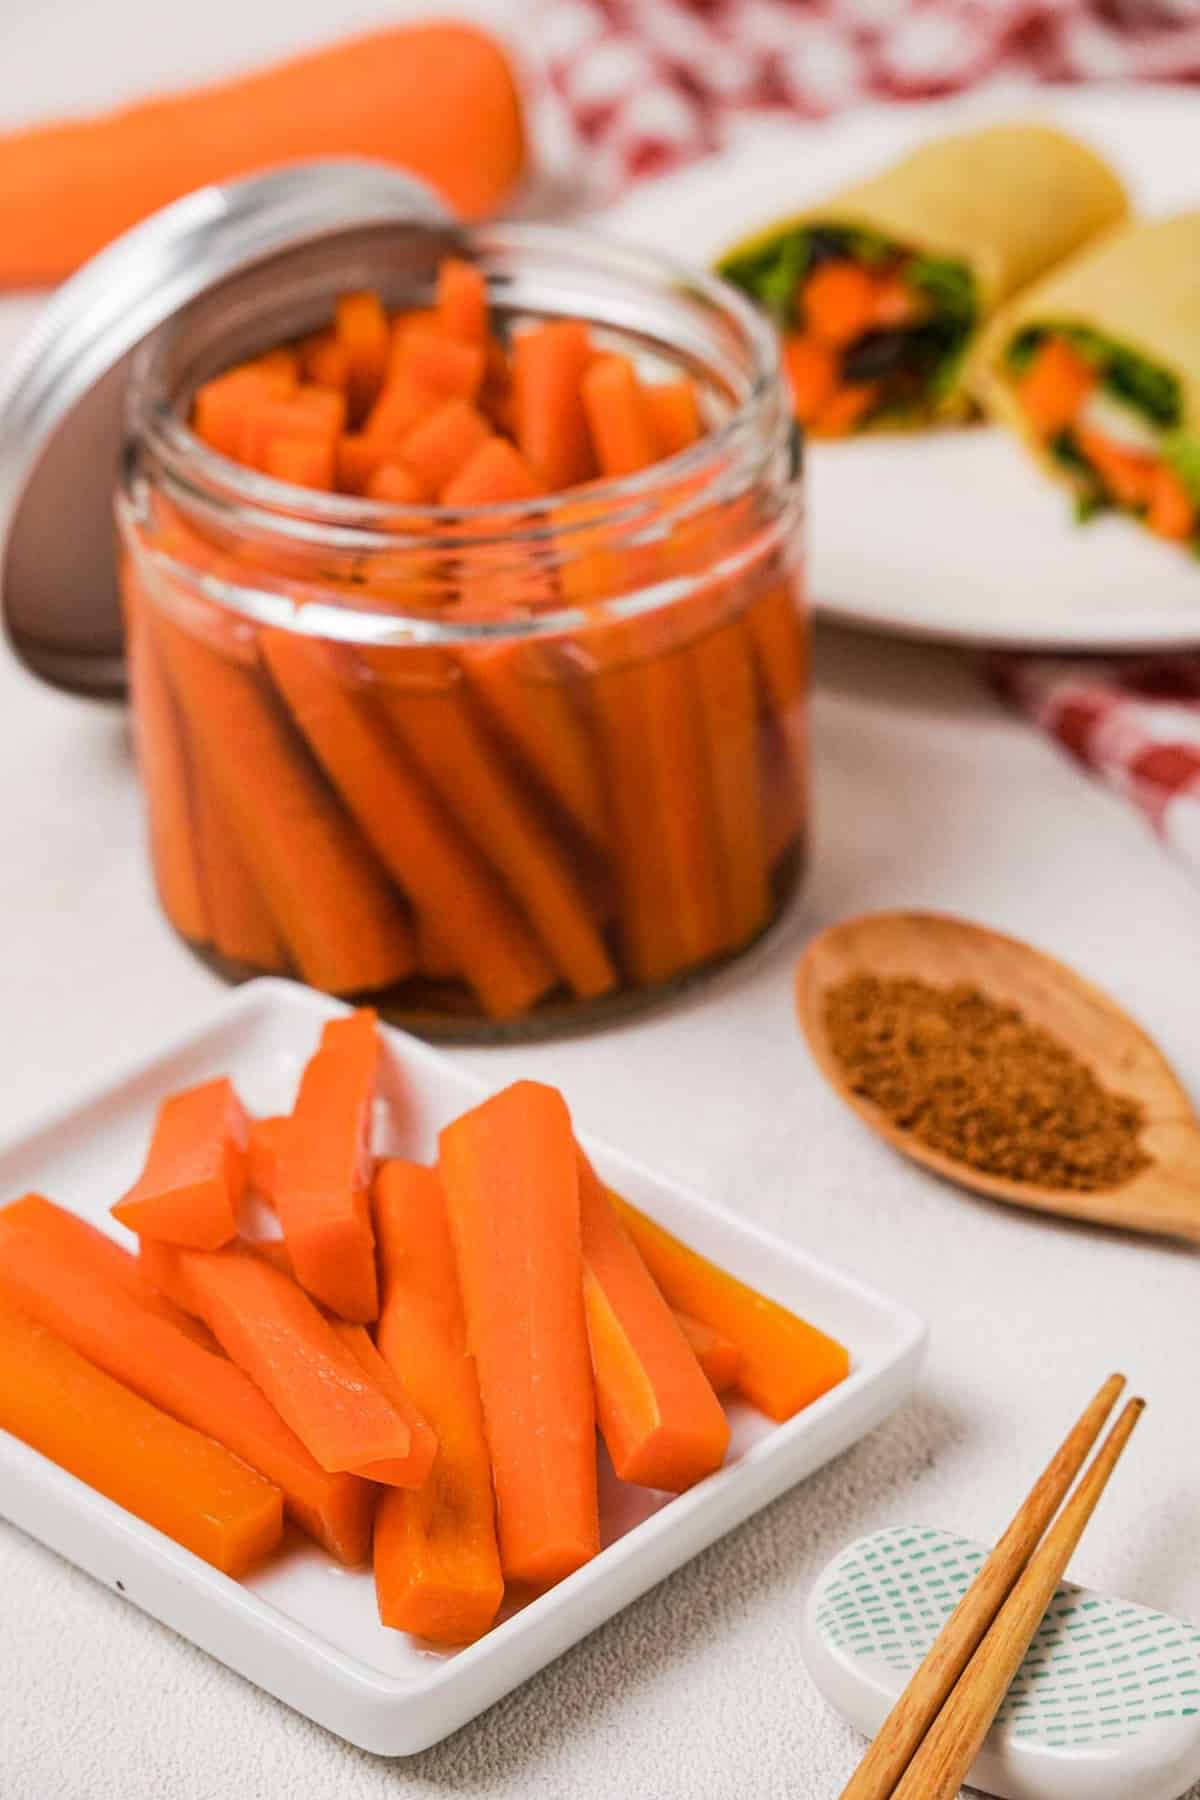 Quick pickled carrots ready 2